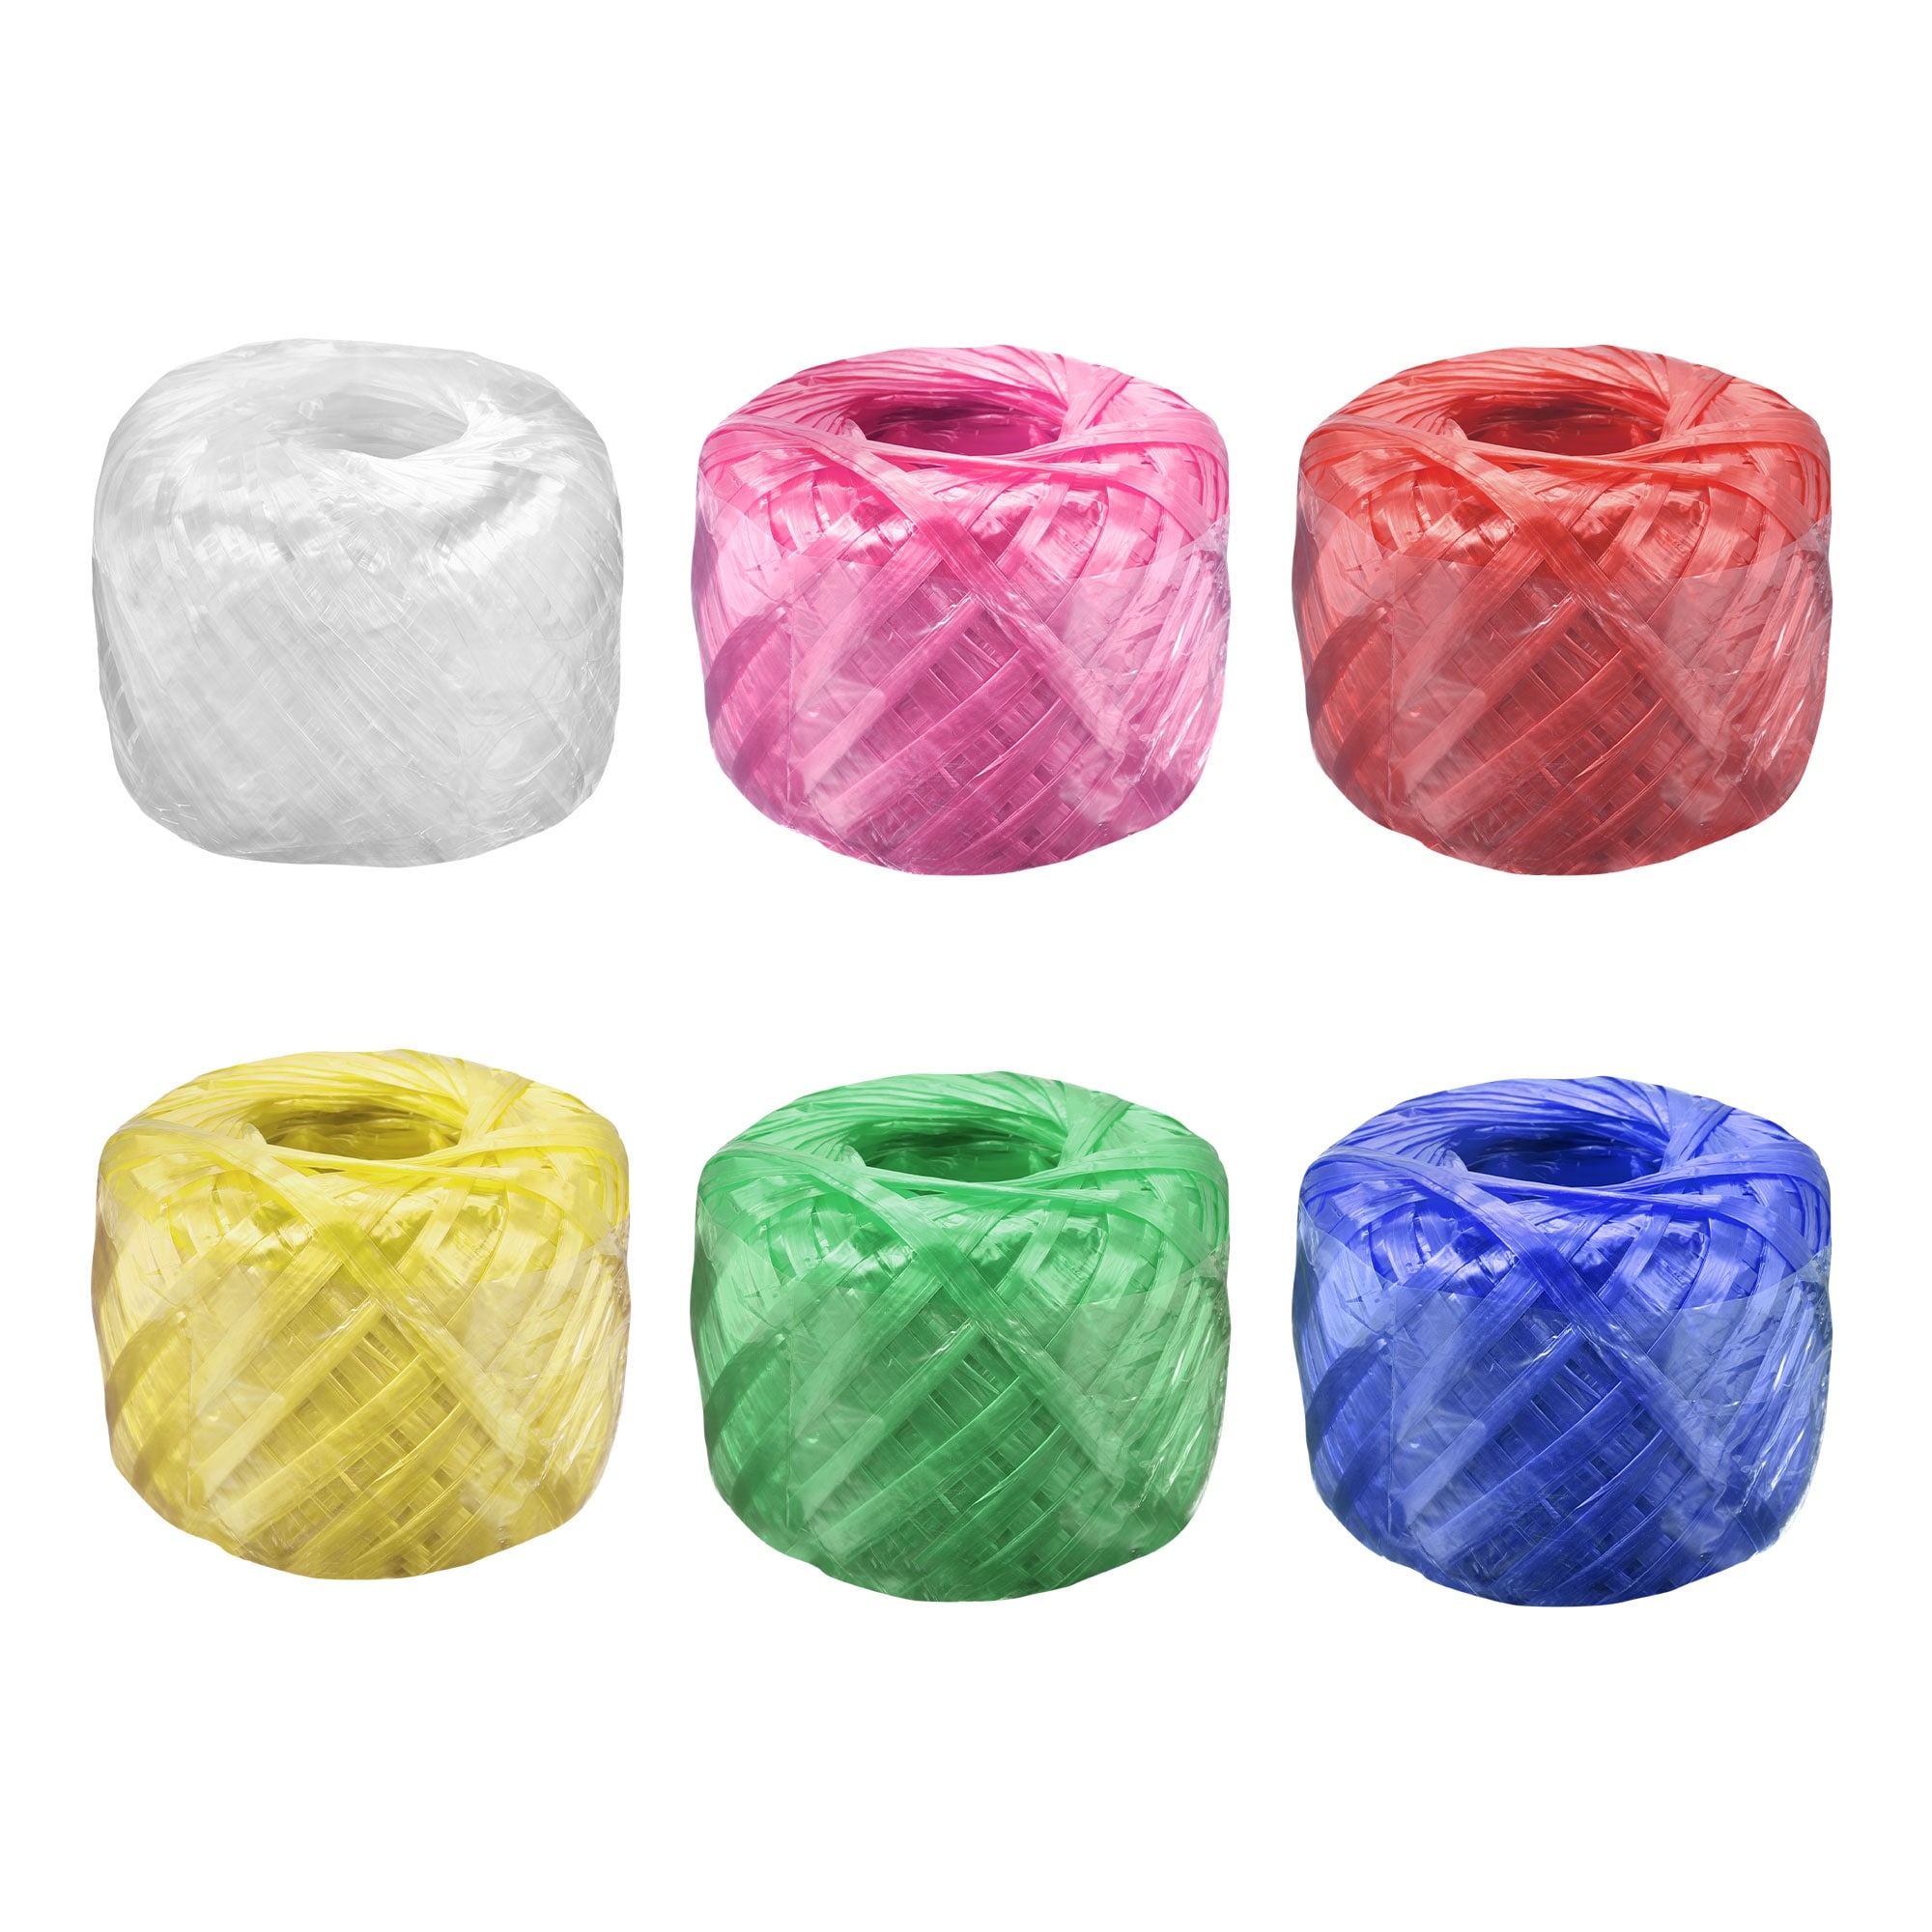 https://ak1.ostkcdn.com/images/products/is/images/direct/b604a809fda868344f7357e3eb6de192be7195f7/Polyester-Nylon-Plastic-Rope-Twine-Household-Bundled%2C150m-6-Colors-6-Rolls.jpg